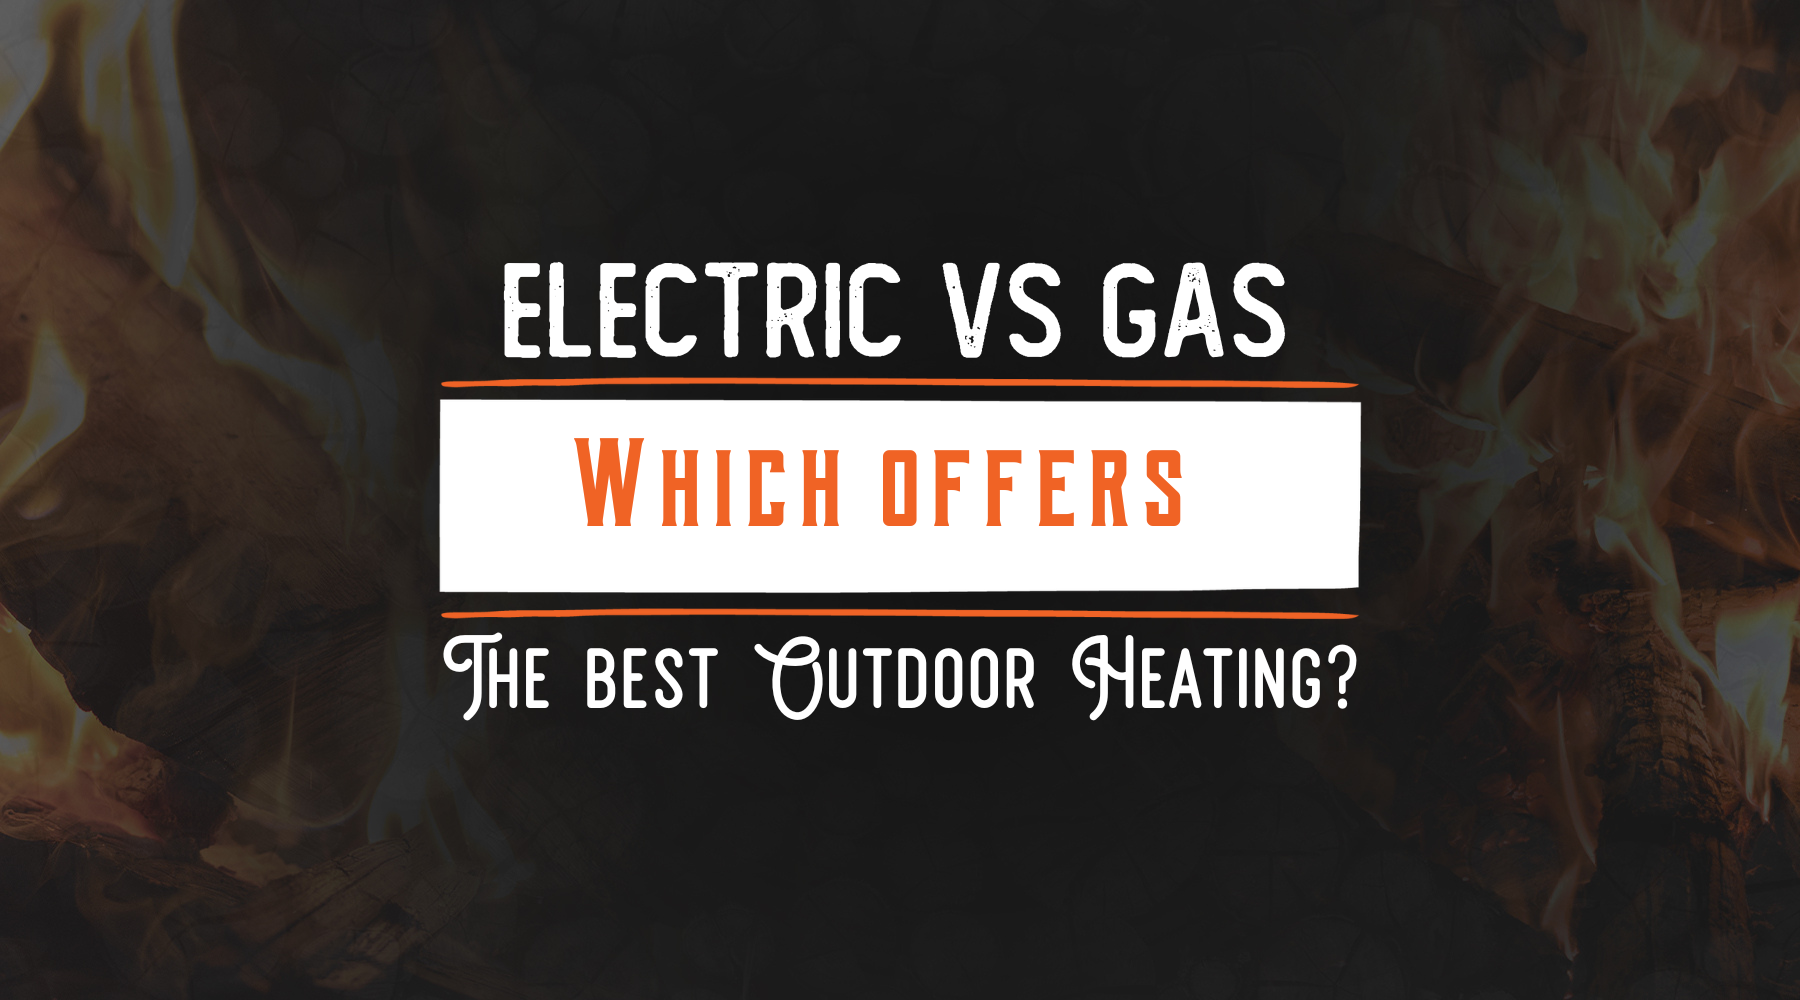 Electric vs Gas Heating: Which offers the best outdoor heating?